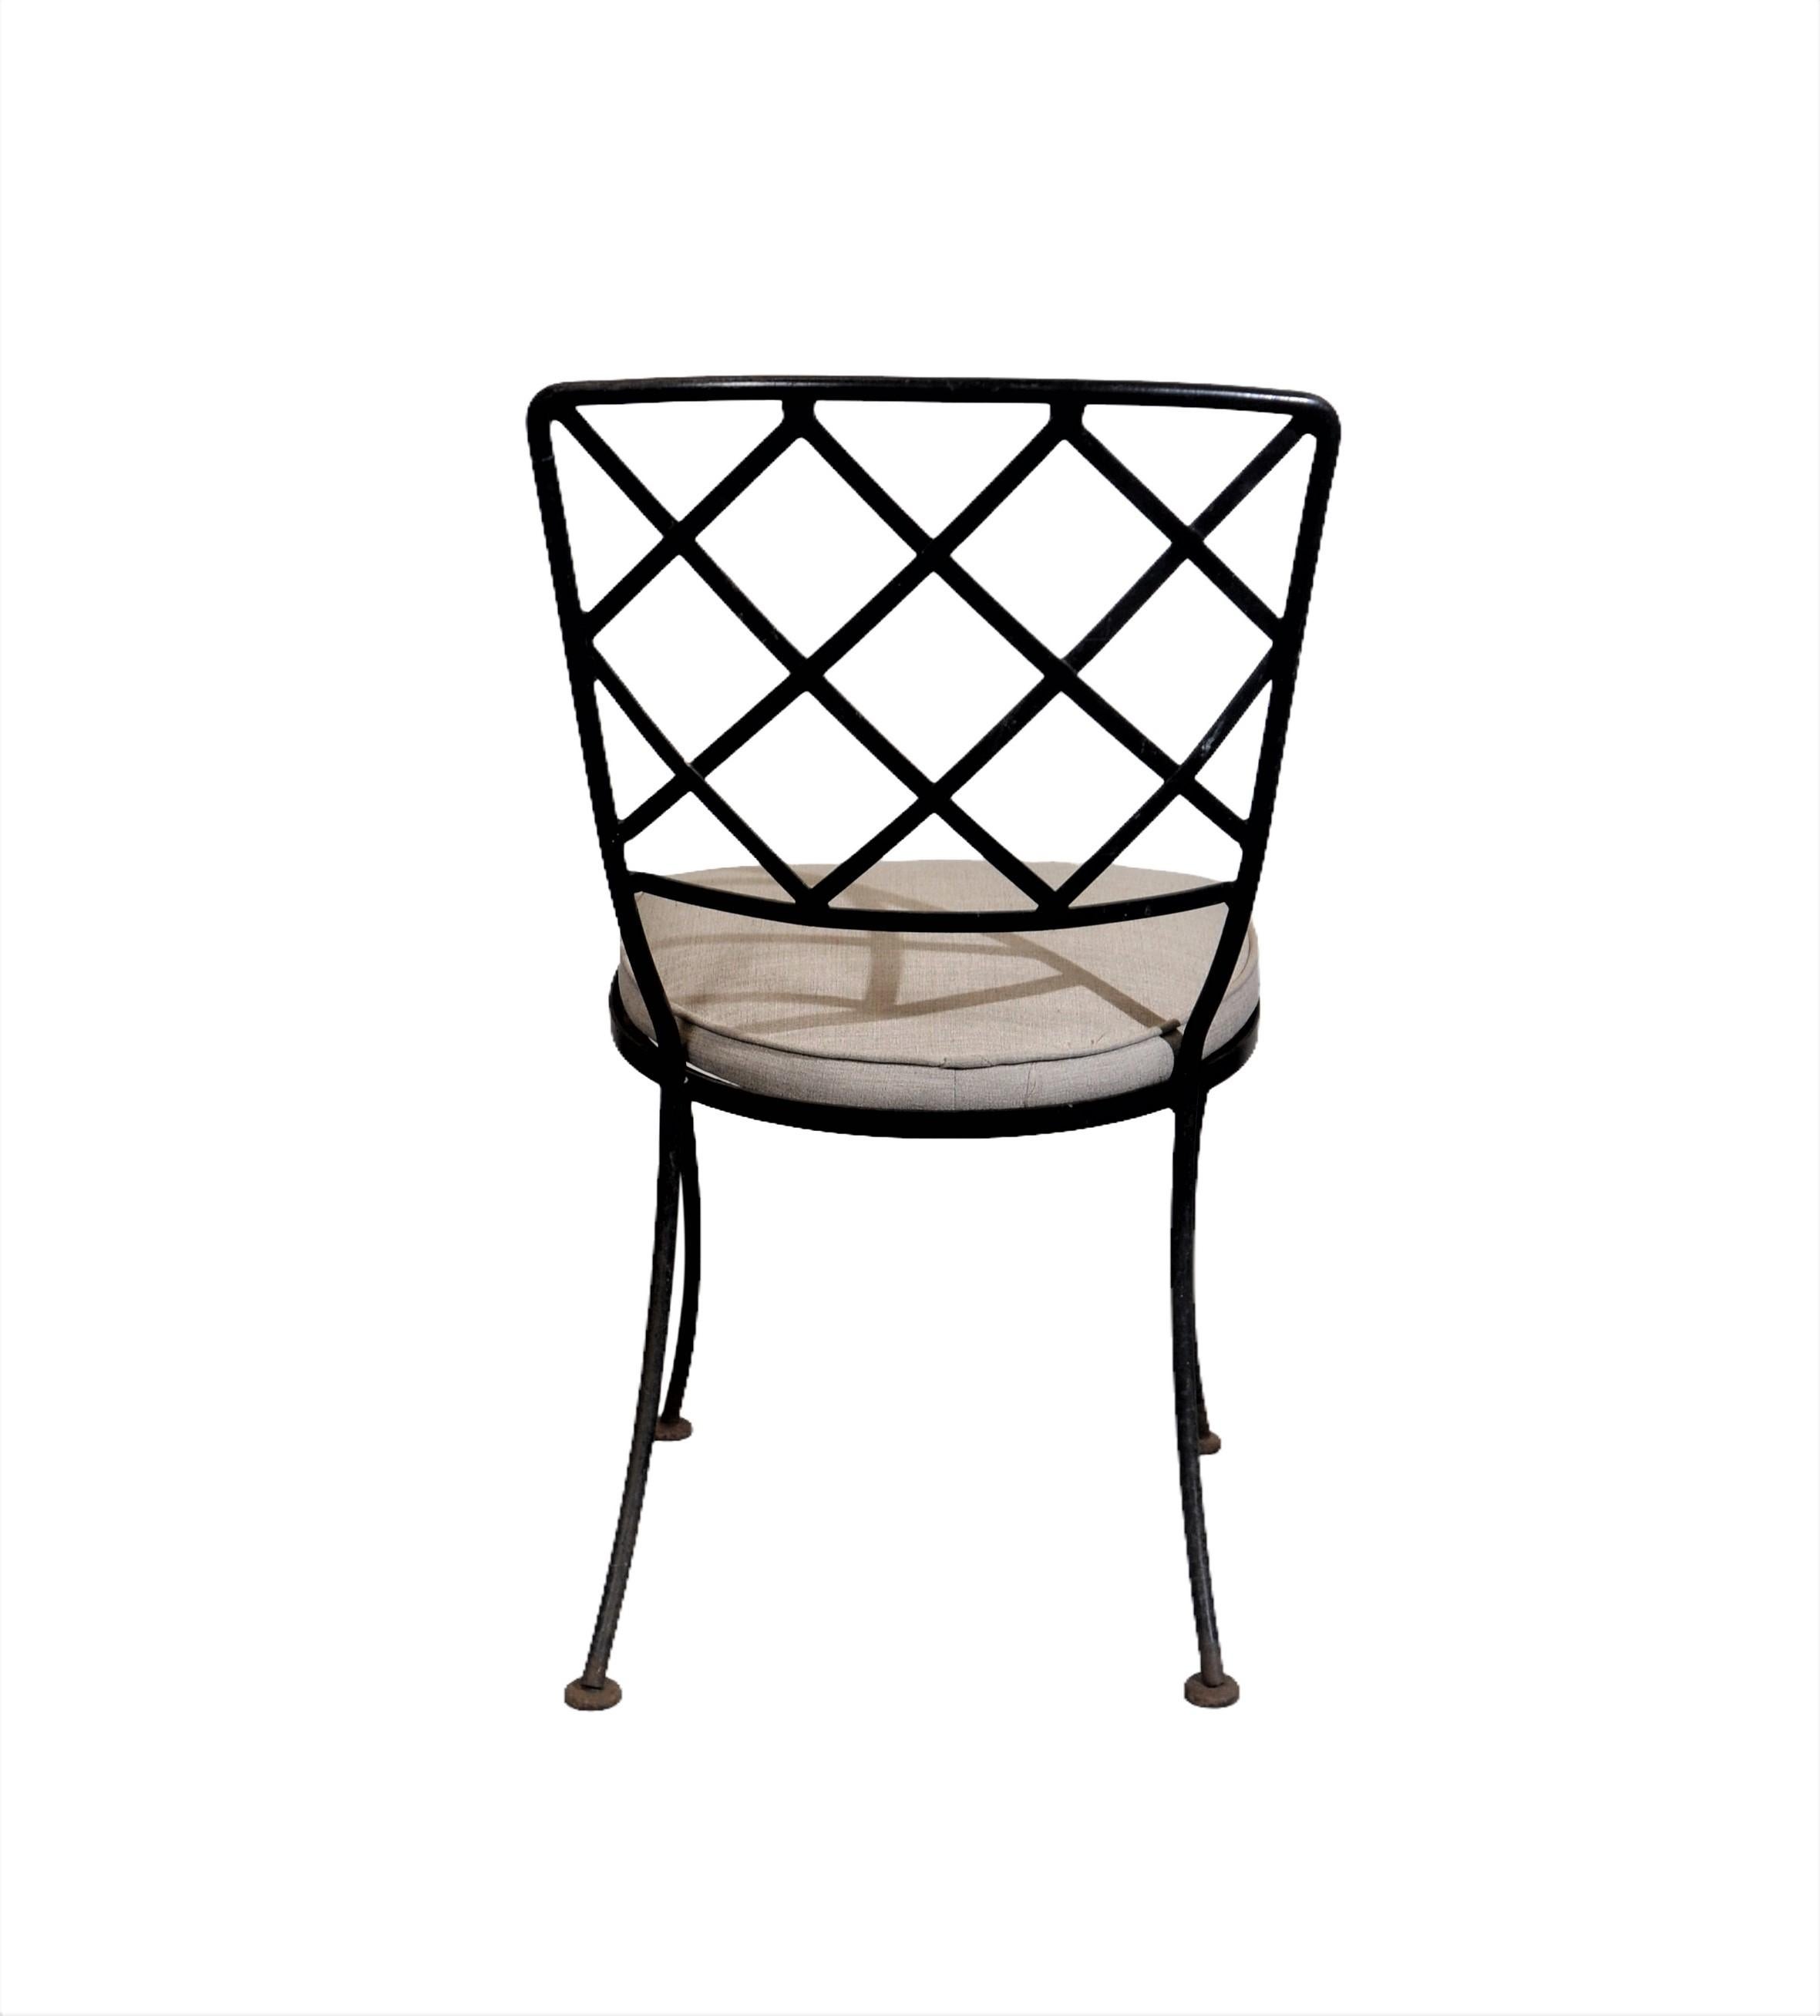 American Iron Patio Chairs Set of 4